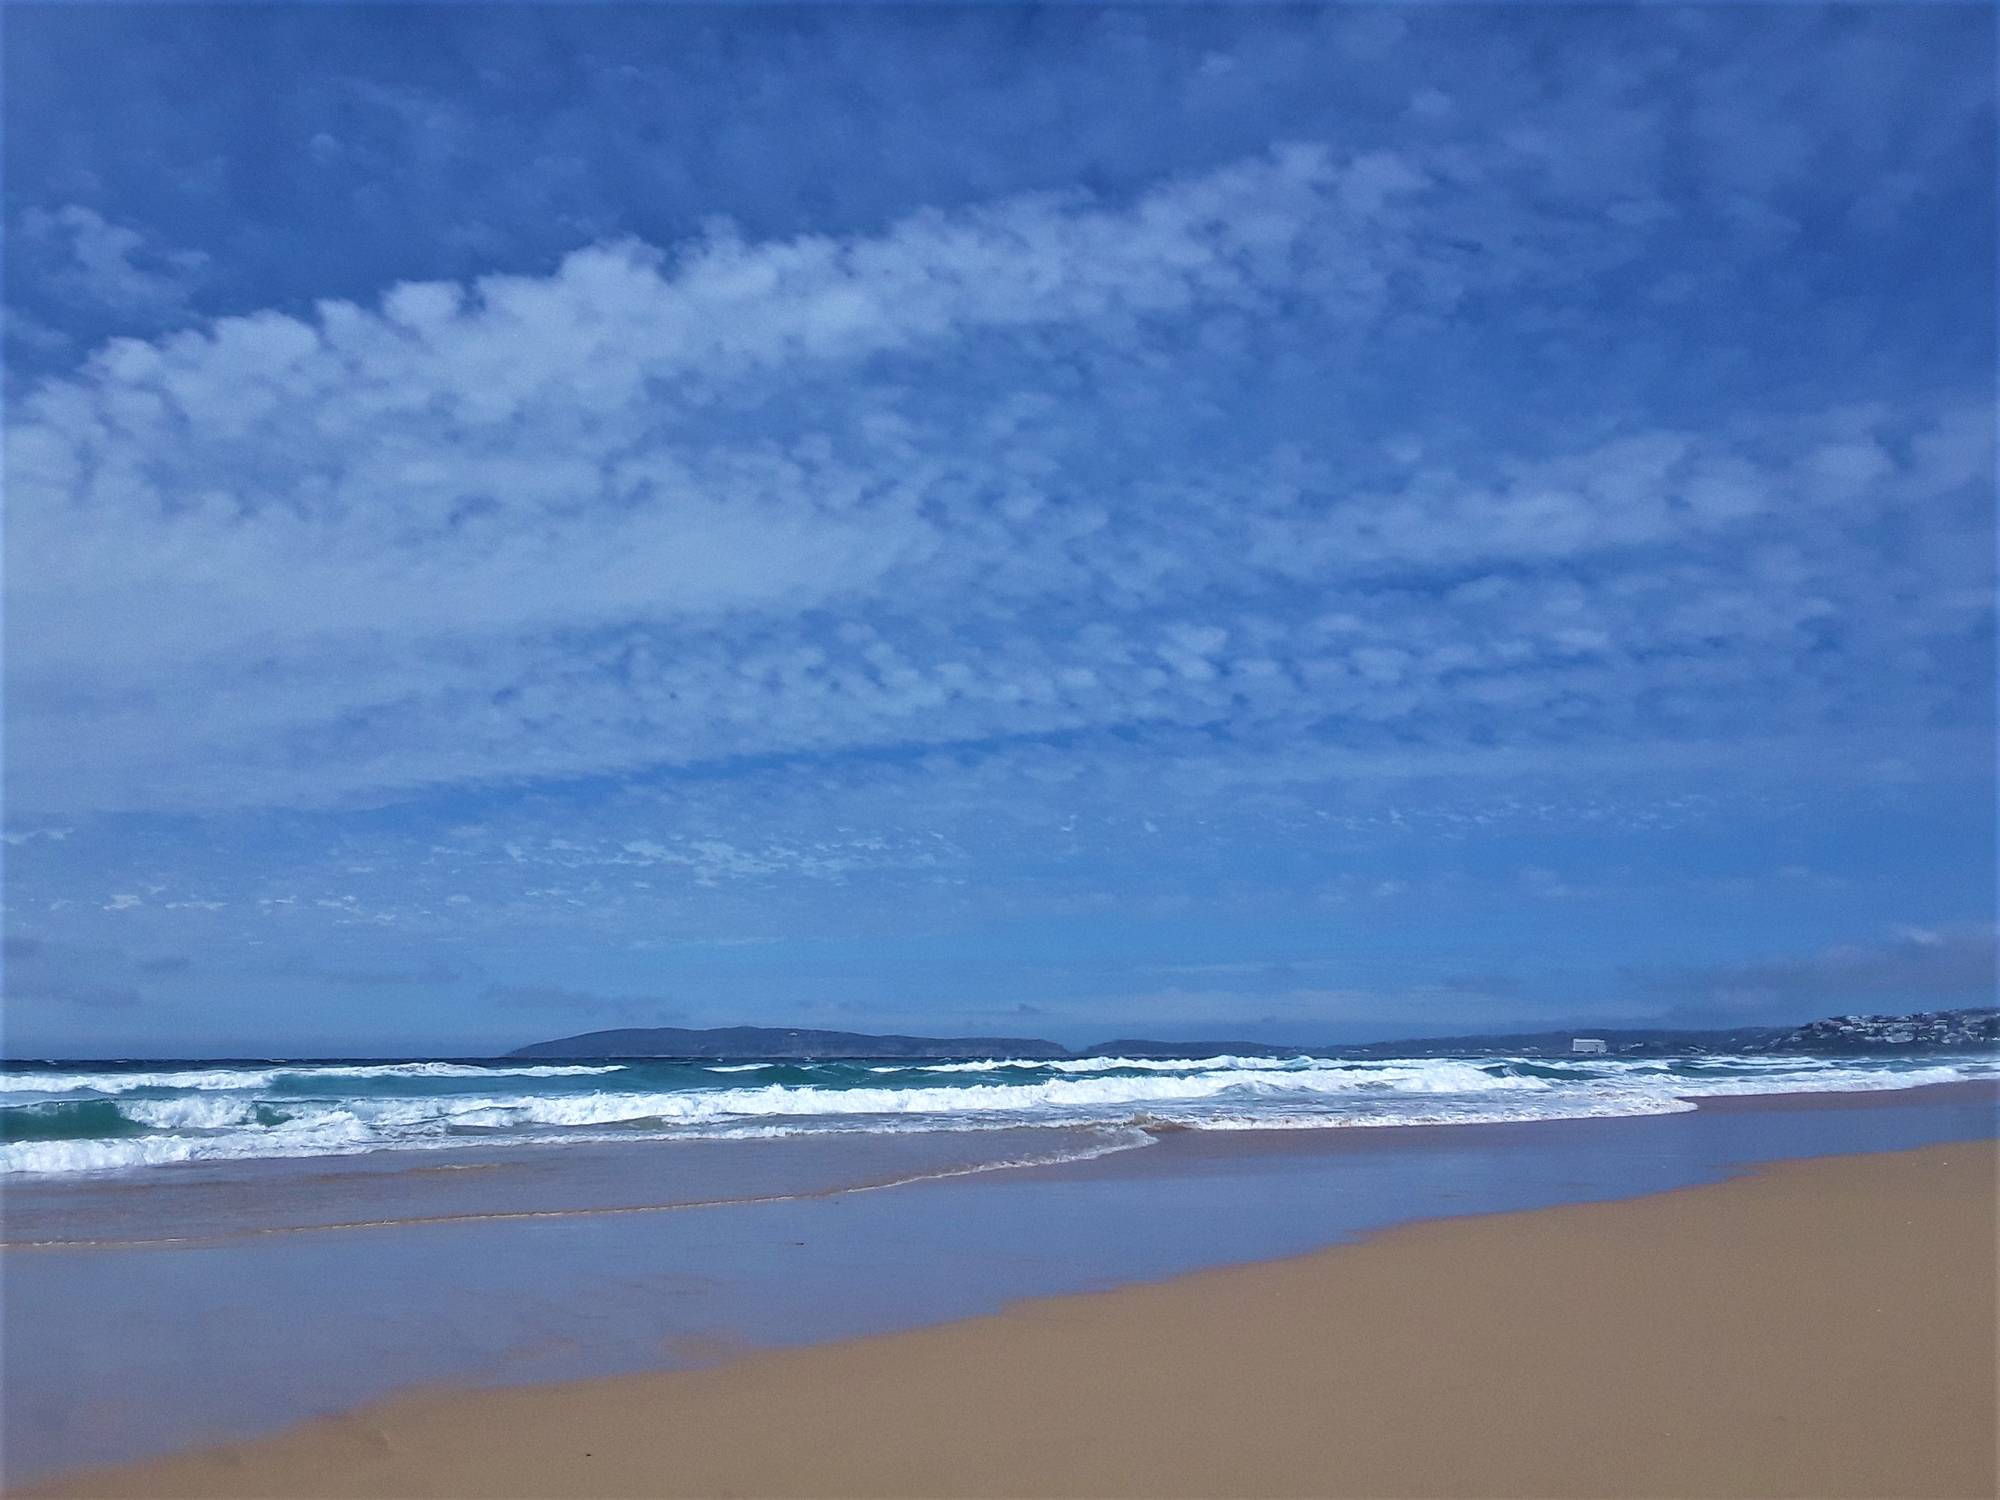 Vast open expanse of sandy white beach on the south coast of Africa with the town of Plettenberg Bay on the right